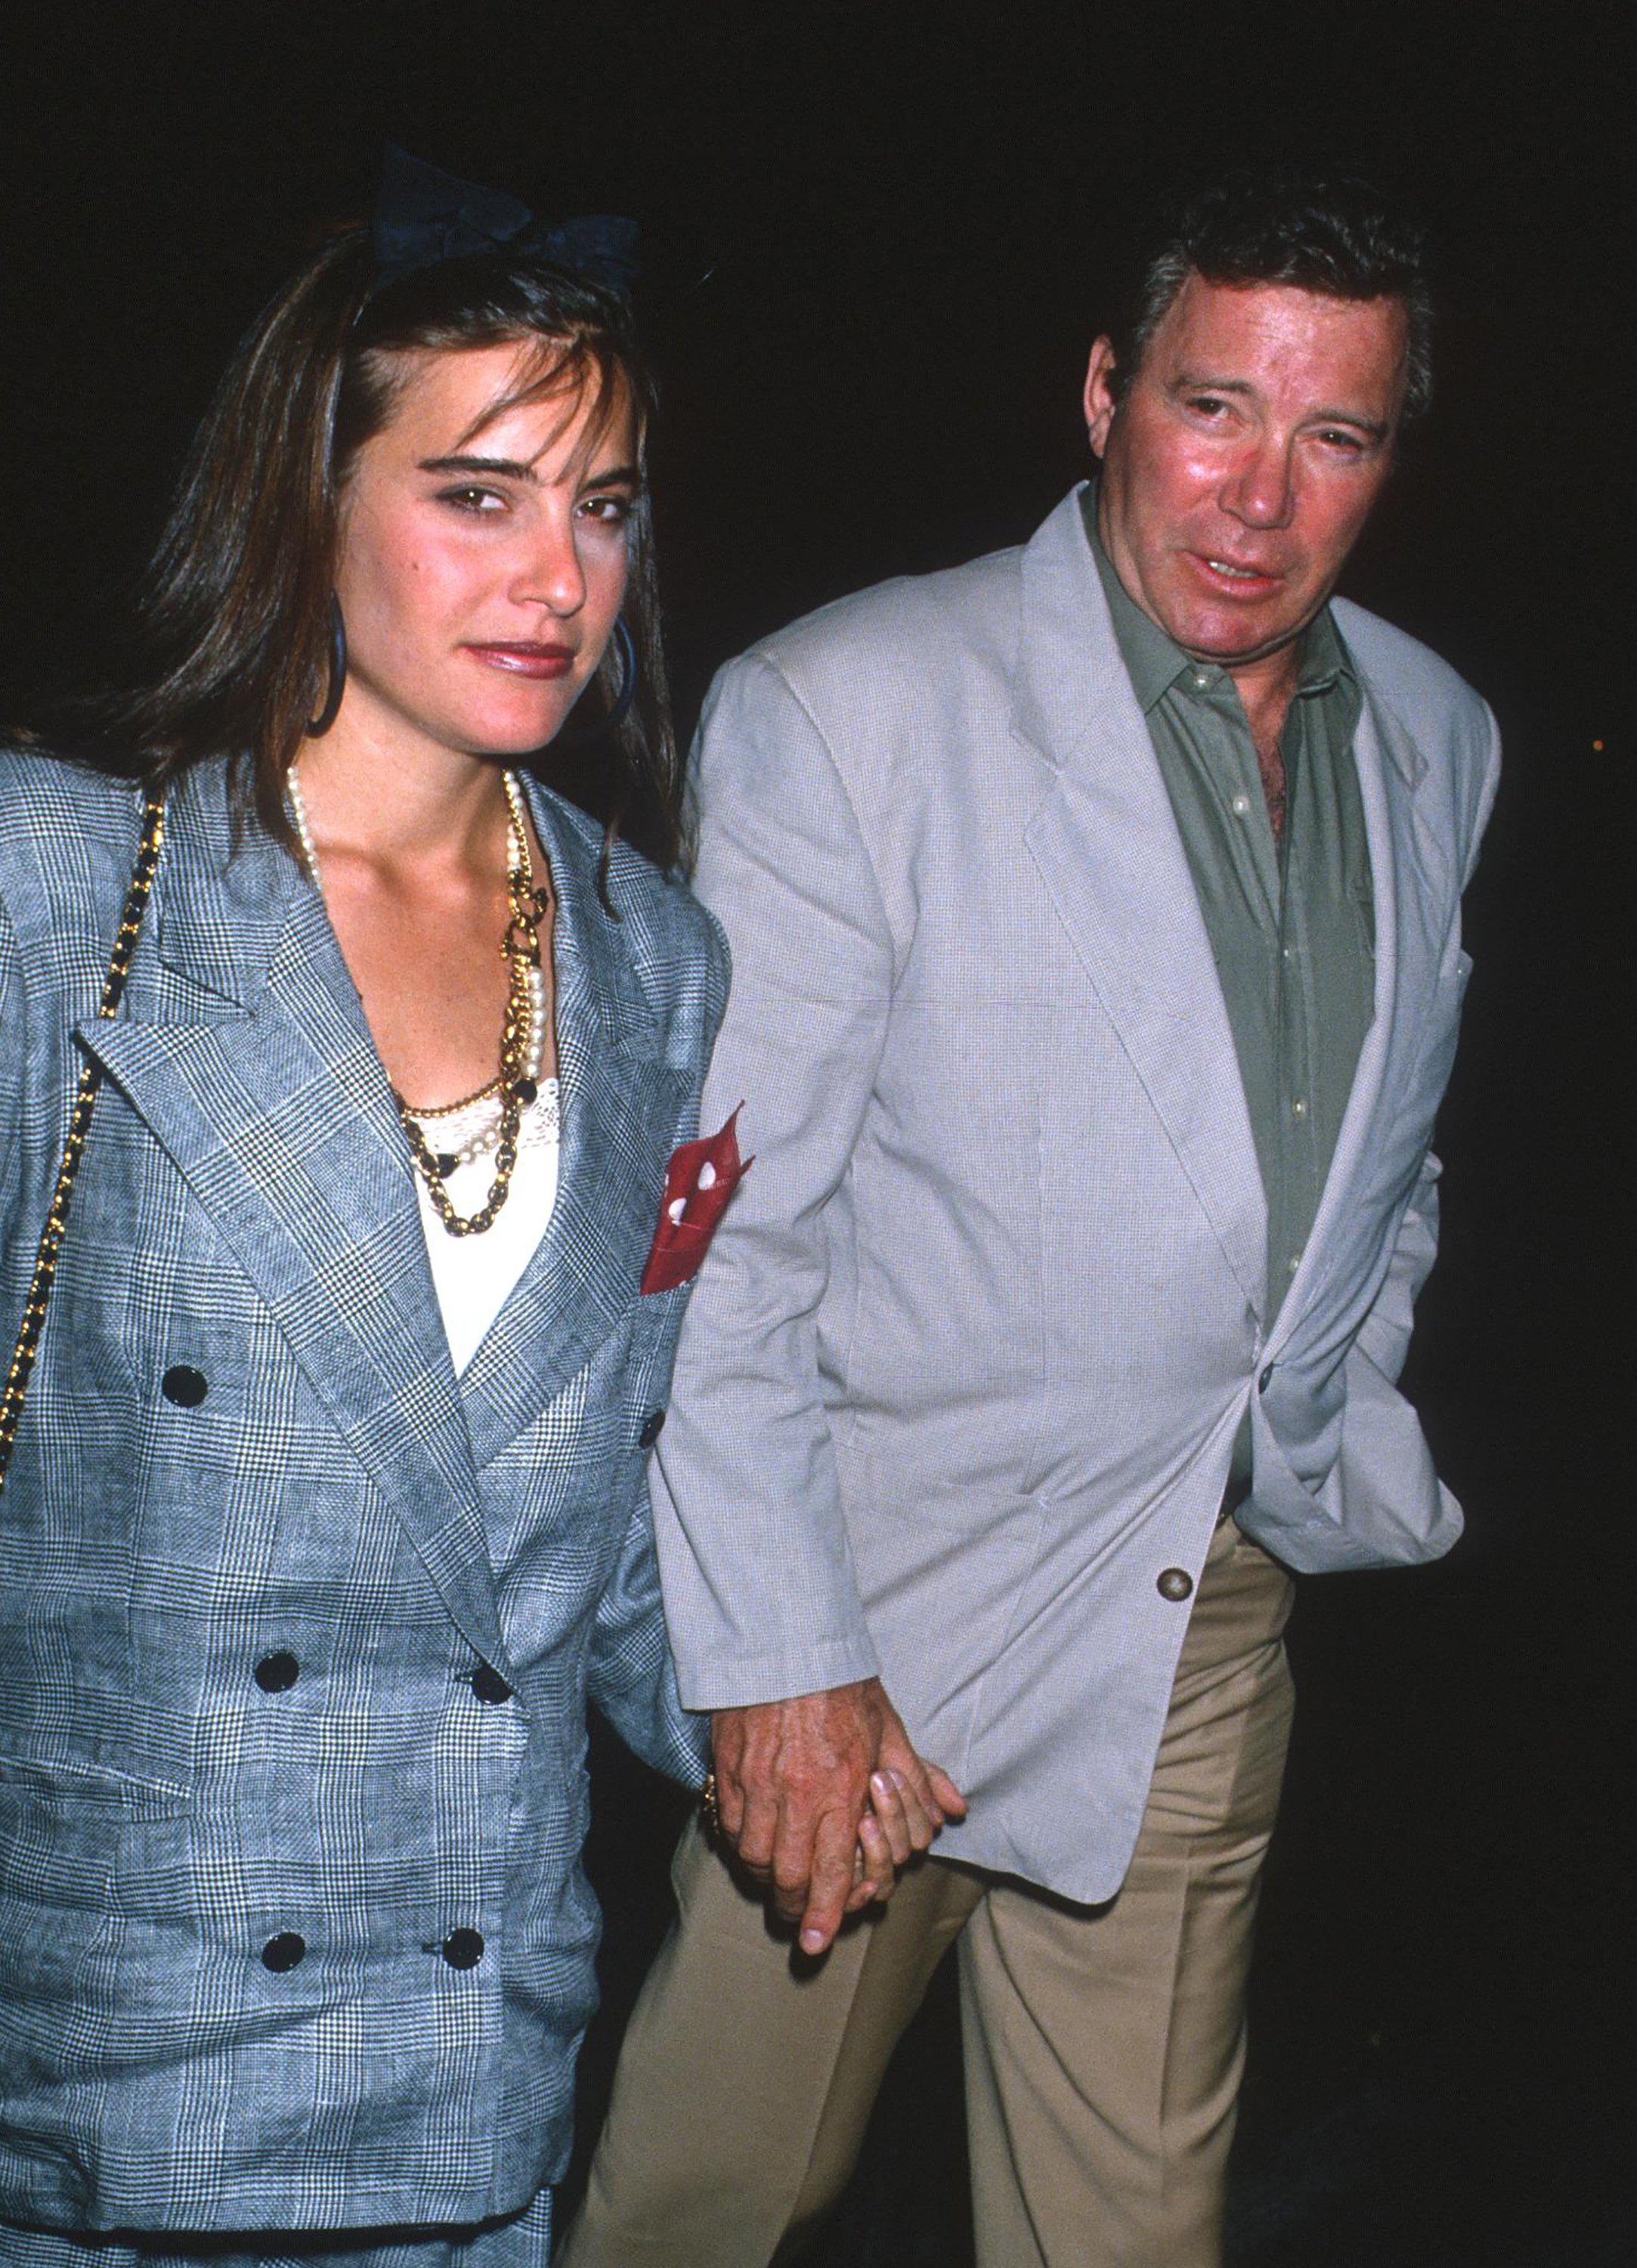 William Shatner and one of his daughters at a screening of "Who's Afraid of Virginia Woolf" in California, October 5, 1989. | Source: Getty Images